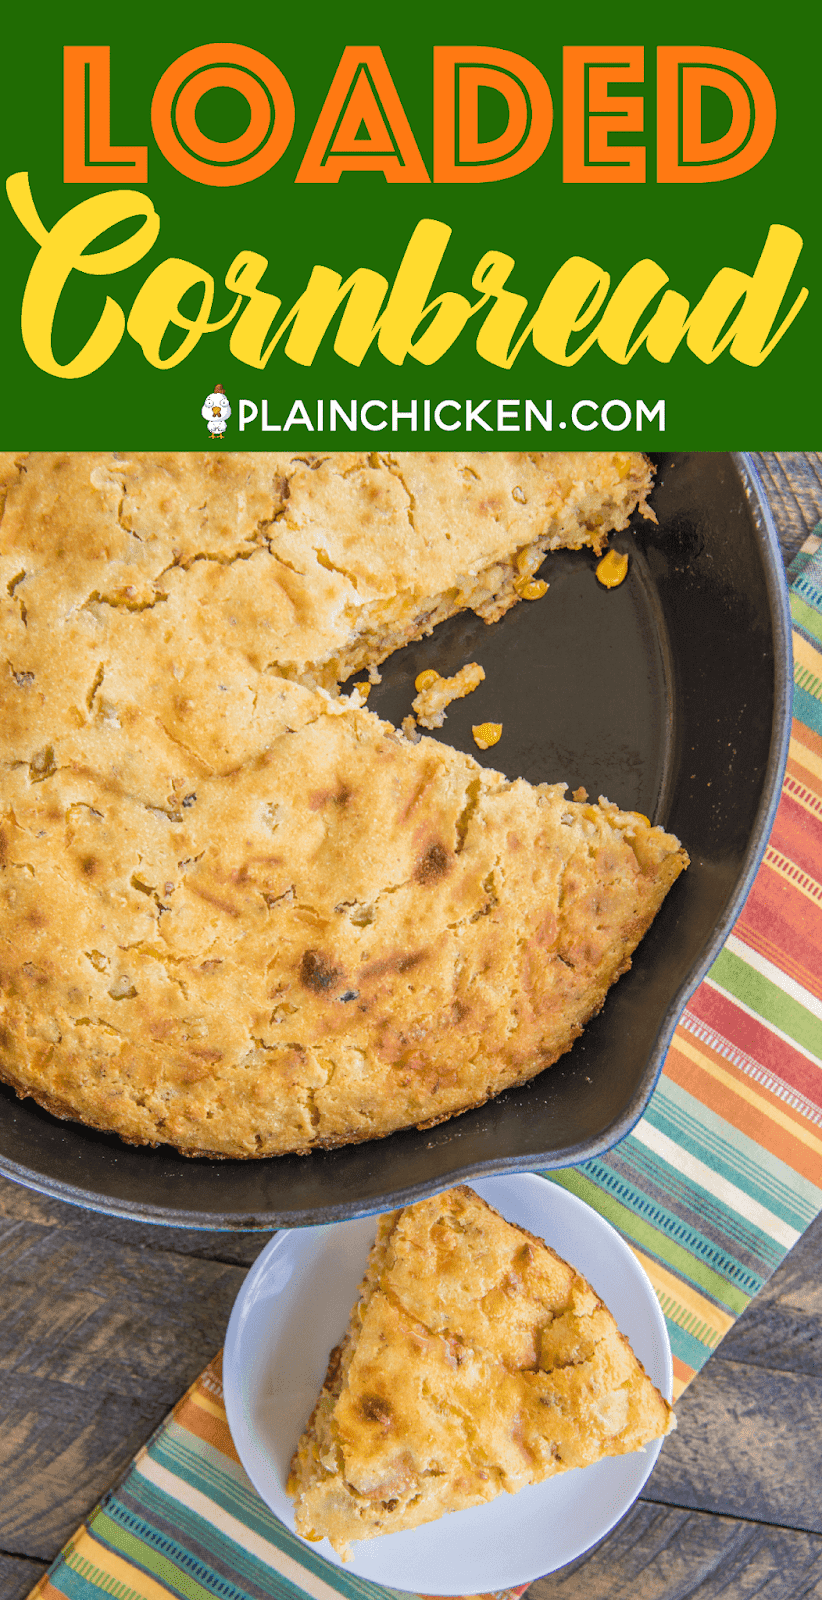 Loaded Cornbread - our favorite cornbread loaded with cheddar cheese, green chiles, creamed corn and bacon! OMG! I could have made a meal out of this yummy cornbread. Great side dish for soups and grilled meats. Give this a try ASAP! SO good!! #cornbread #bacon #bread #sidedish